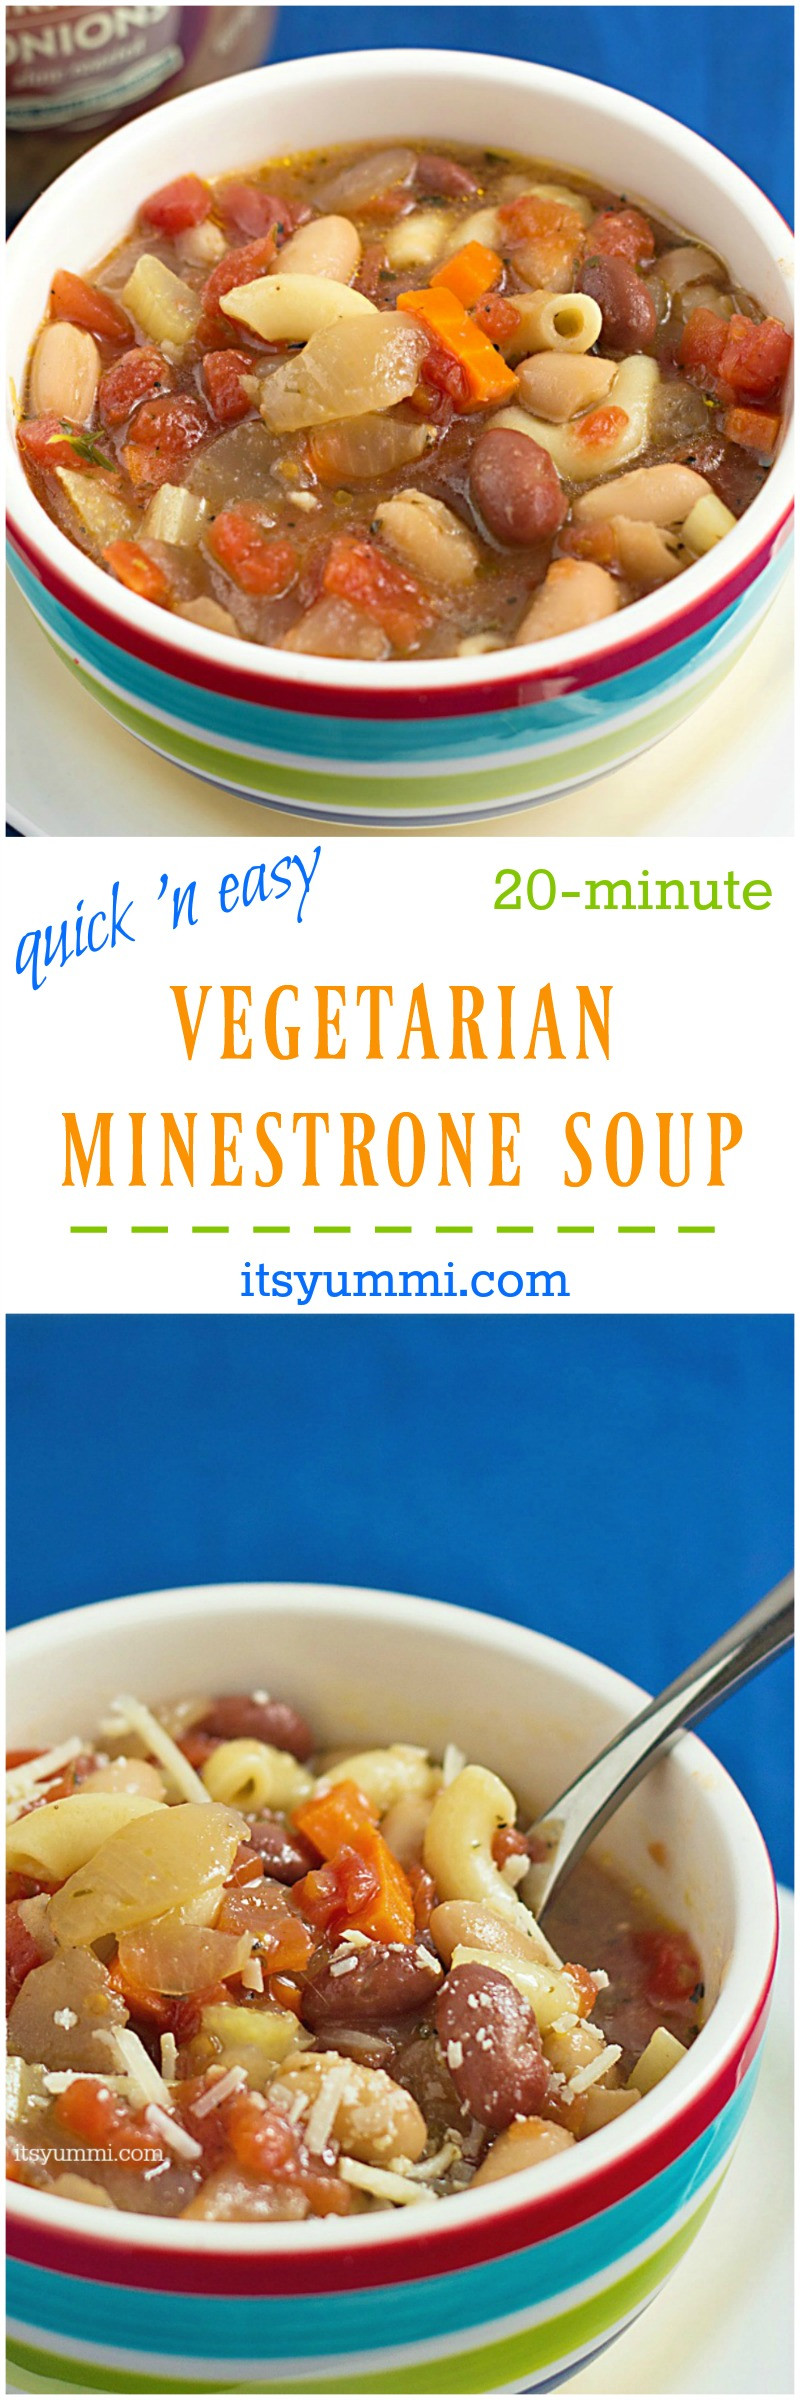 Vegan Soup Recipes Easy
 Easy Ve arian Minestrone Soup